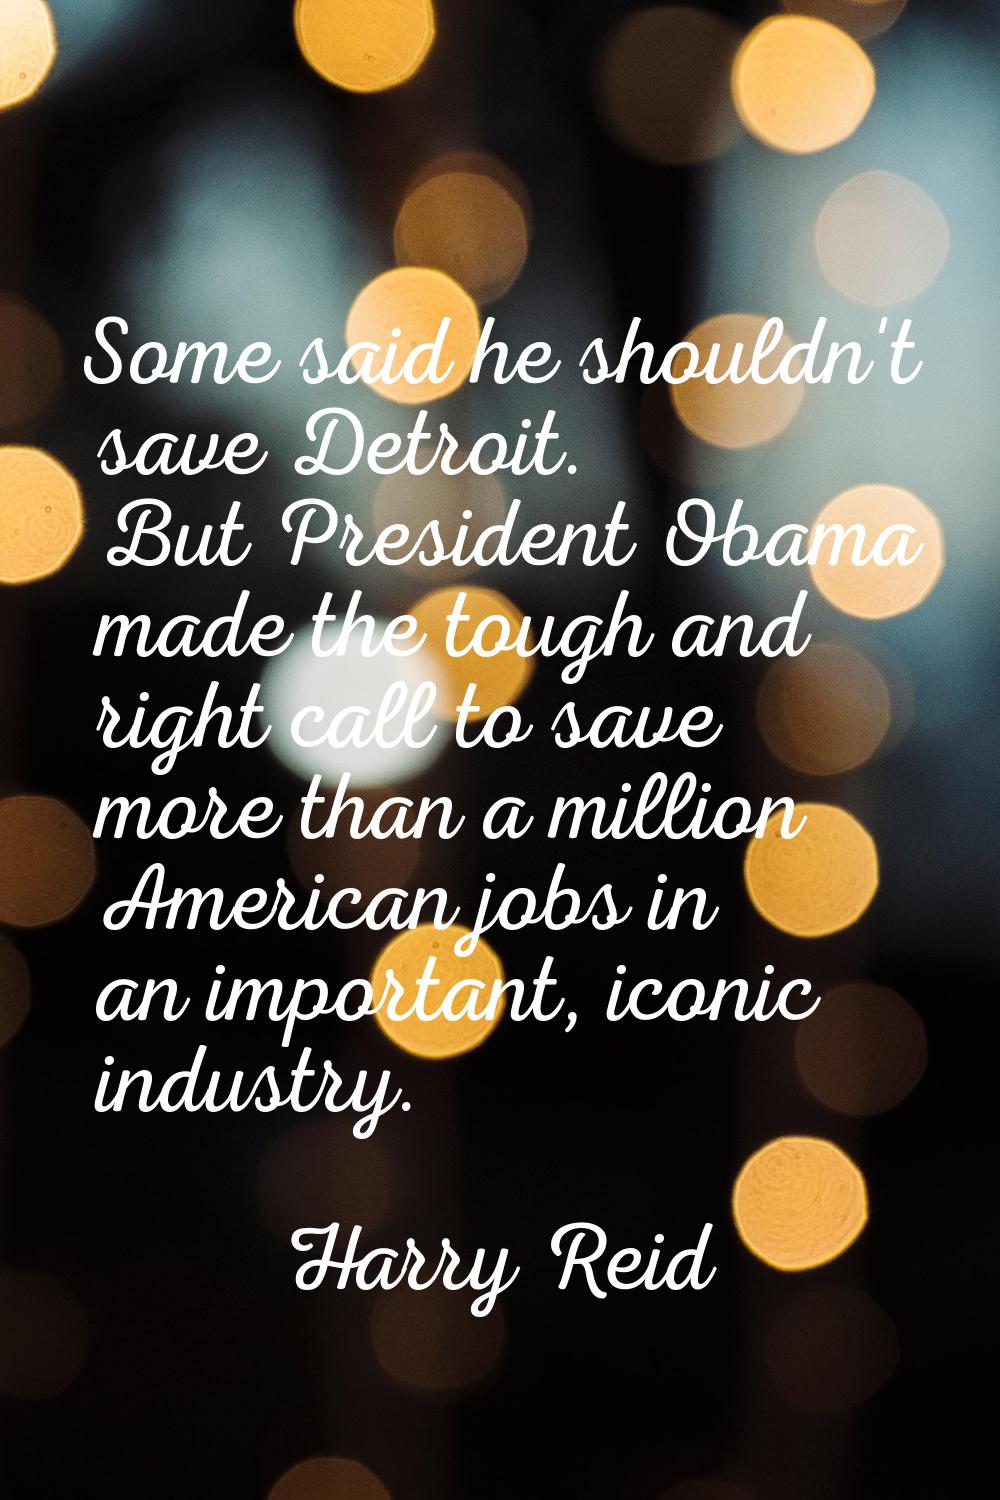 Some said he shouldn't save Detroit. But President Obama made the tough and right call to save more